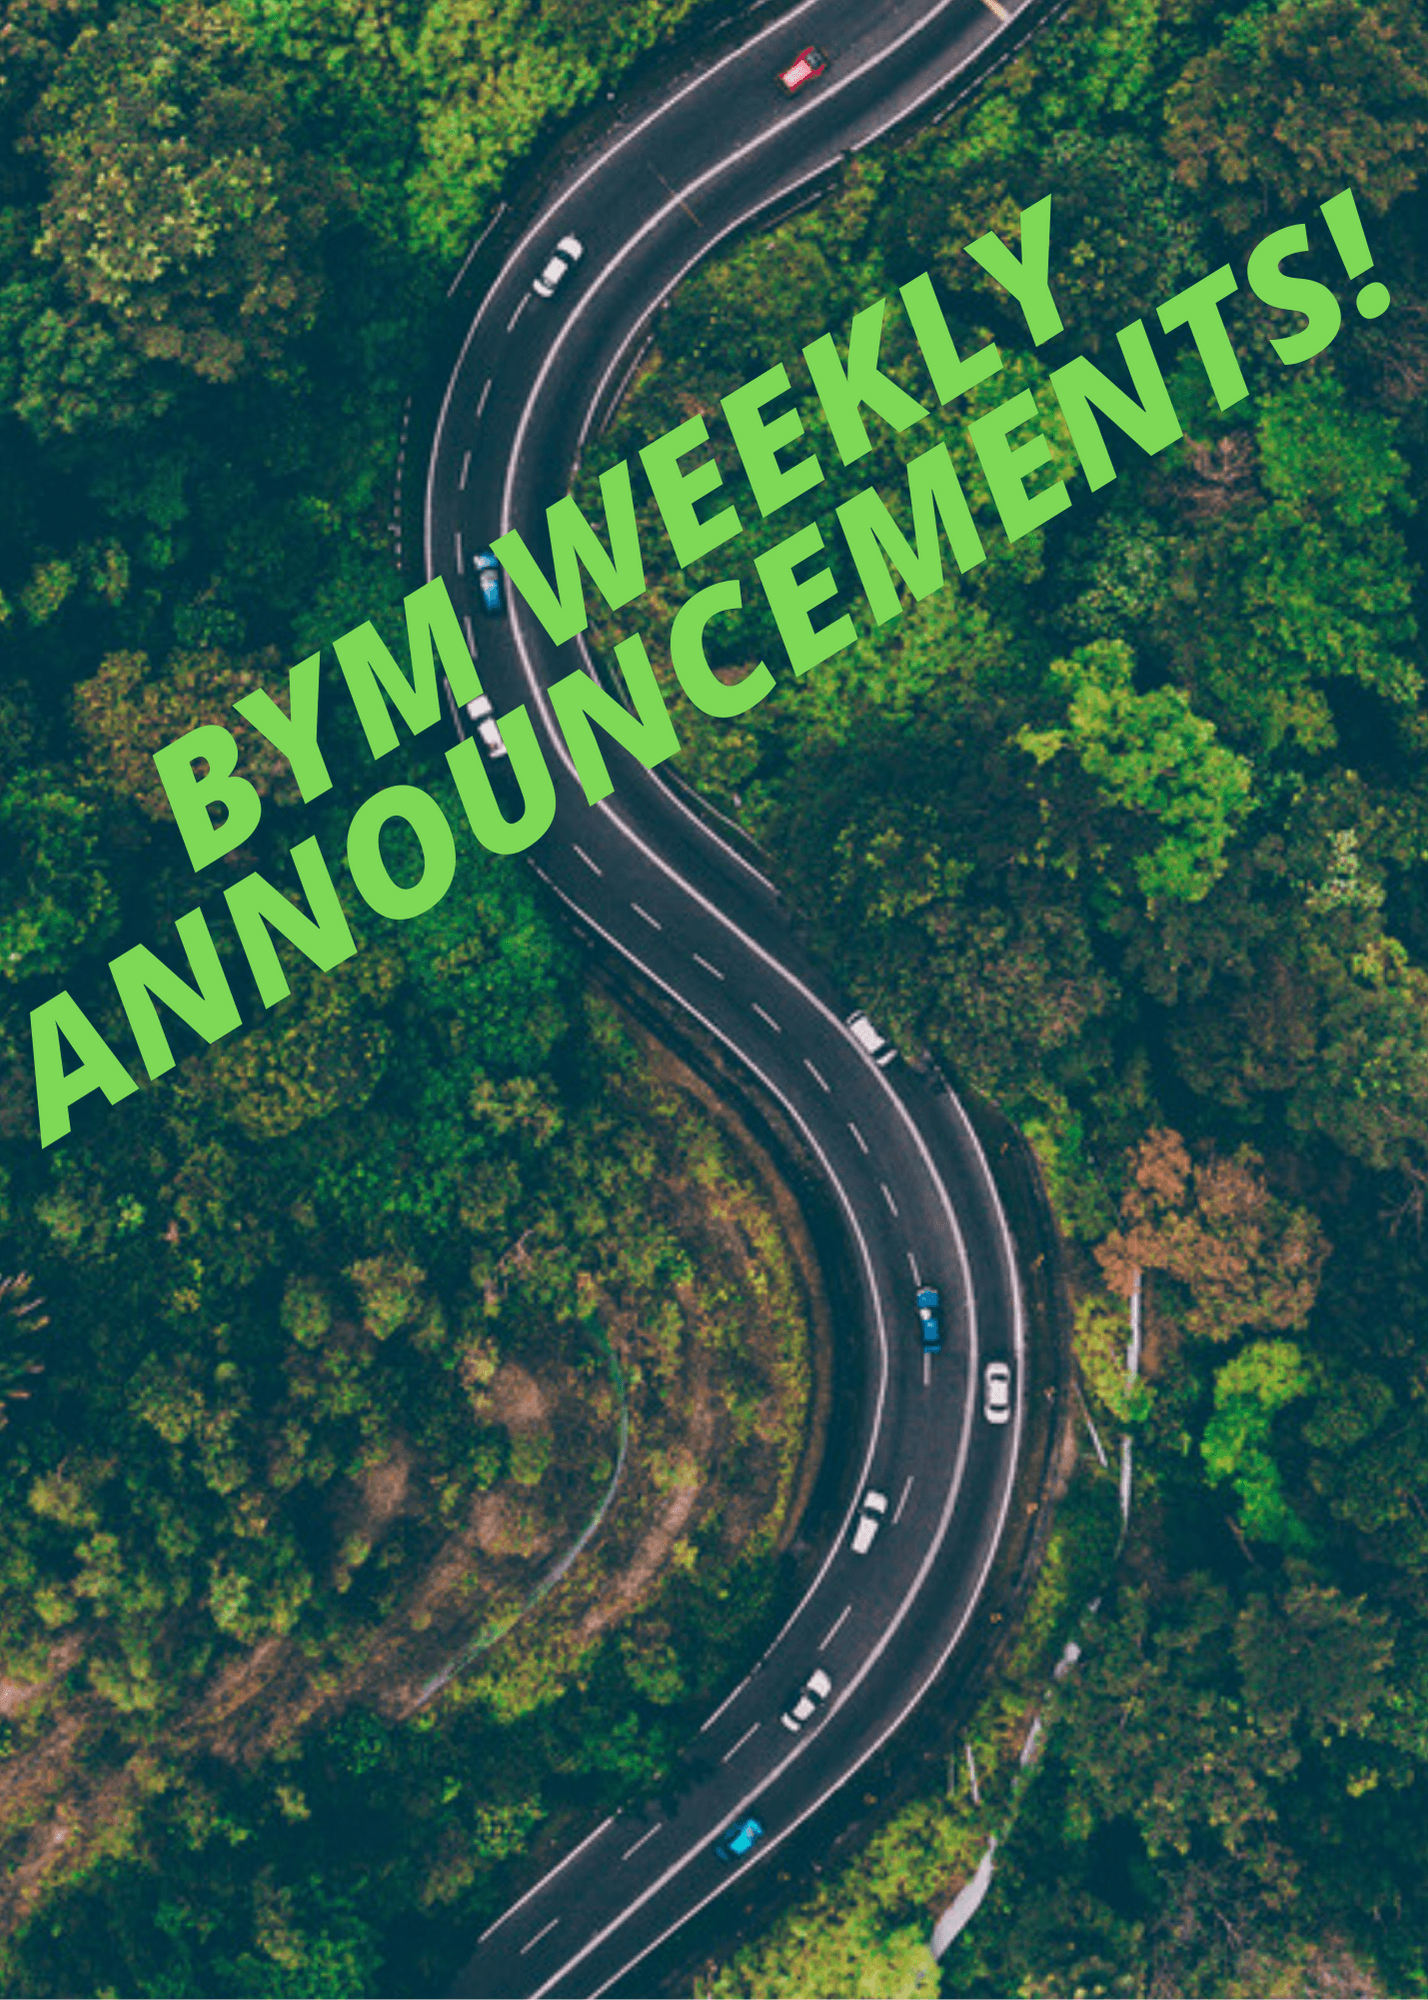 Weekly Announcements!